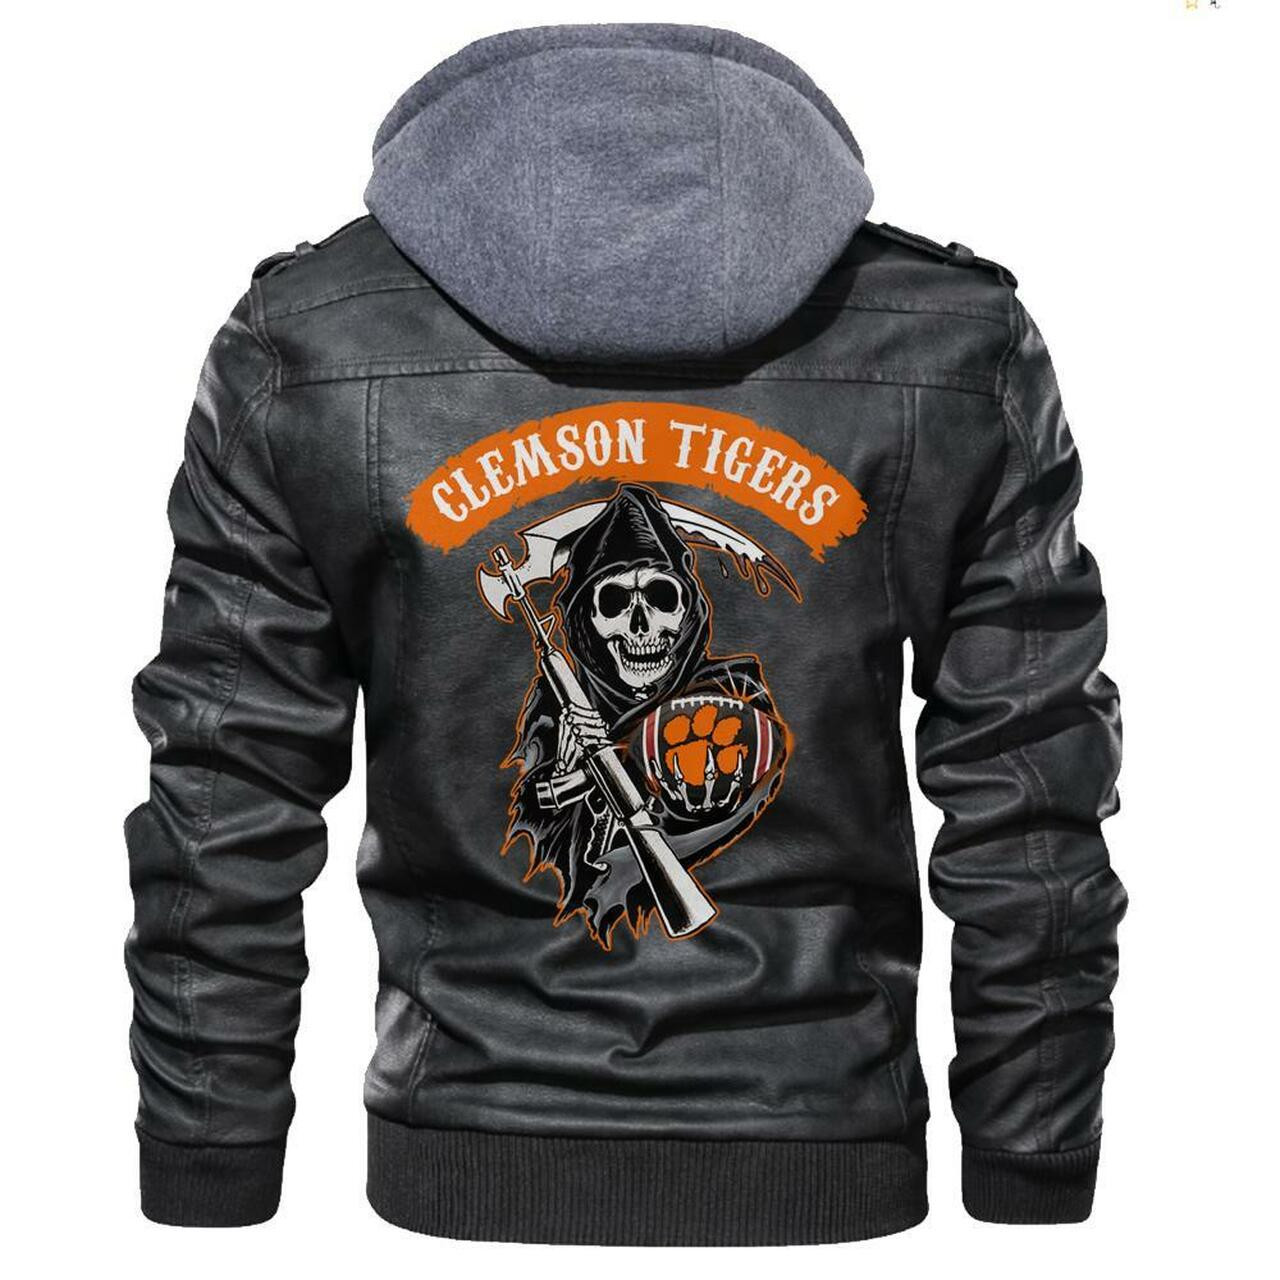 Check out and find the right leather jacket below 22